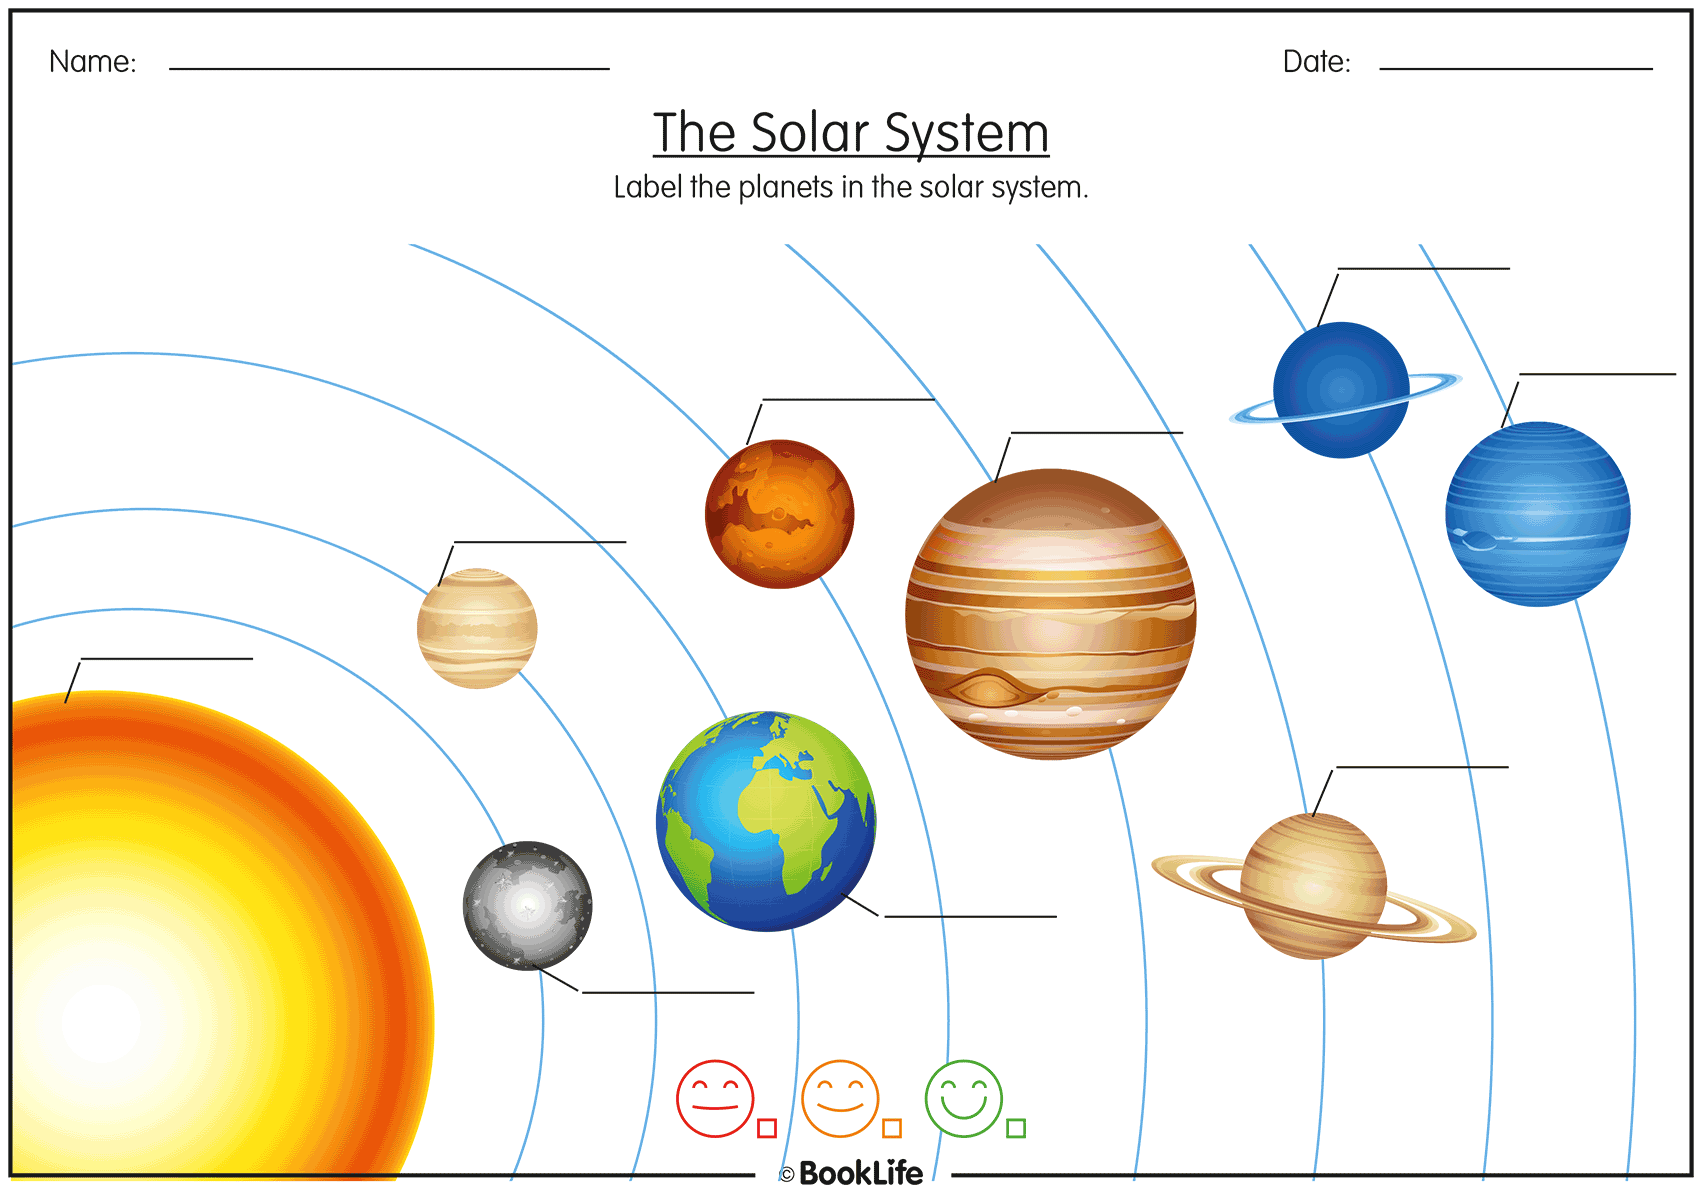 The Solar System by BookLife